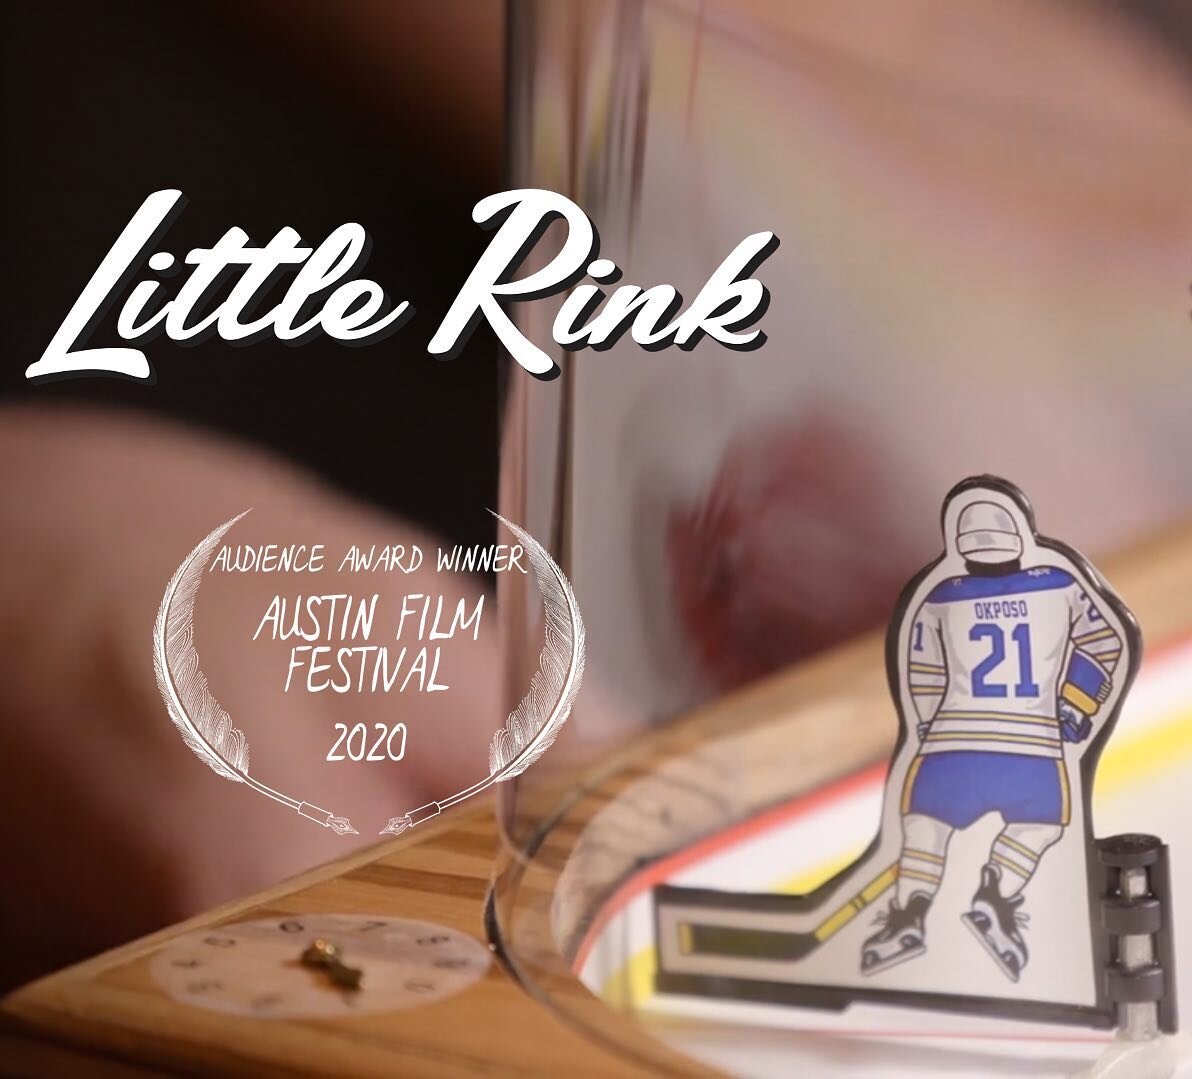 We are thrilled to announce that LITTLE RINK won The Short Documentary Audience Award @austinfilmfest 
Thanks to all who supported us and who voted! #ShortFilm #documentary #Tablehockey #Hockey #austinfilmfestival #sohohockey #vote #votingmatters